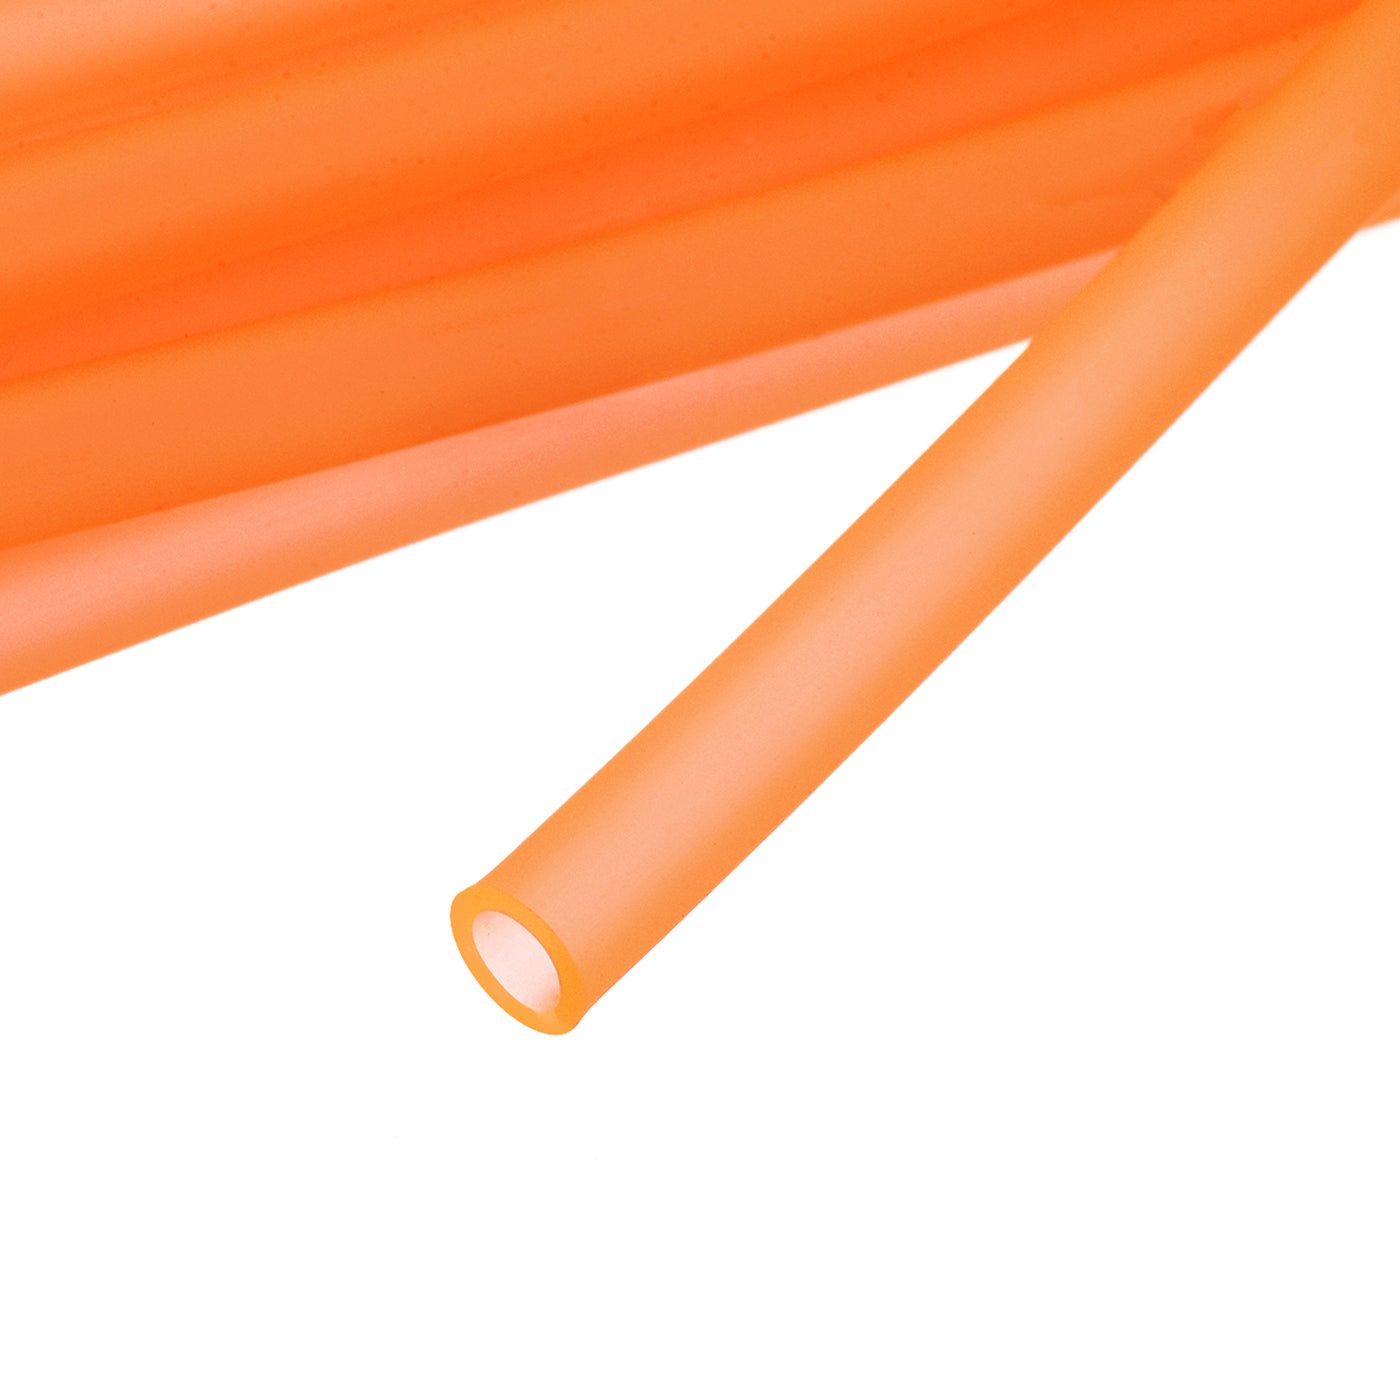 uxcell Uxcell Silicone Tubing 5/32" ID, 15/64" OD 1Pcs 13.12 Ft for Pump Transfer, Orange